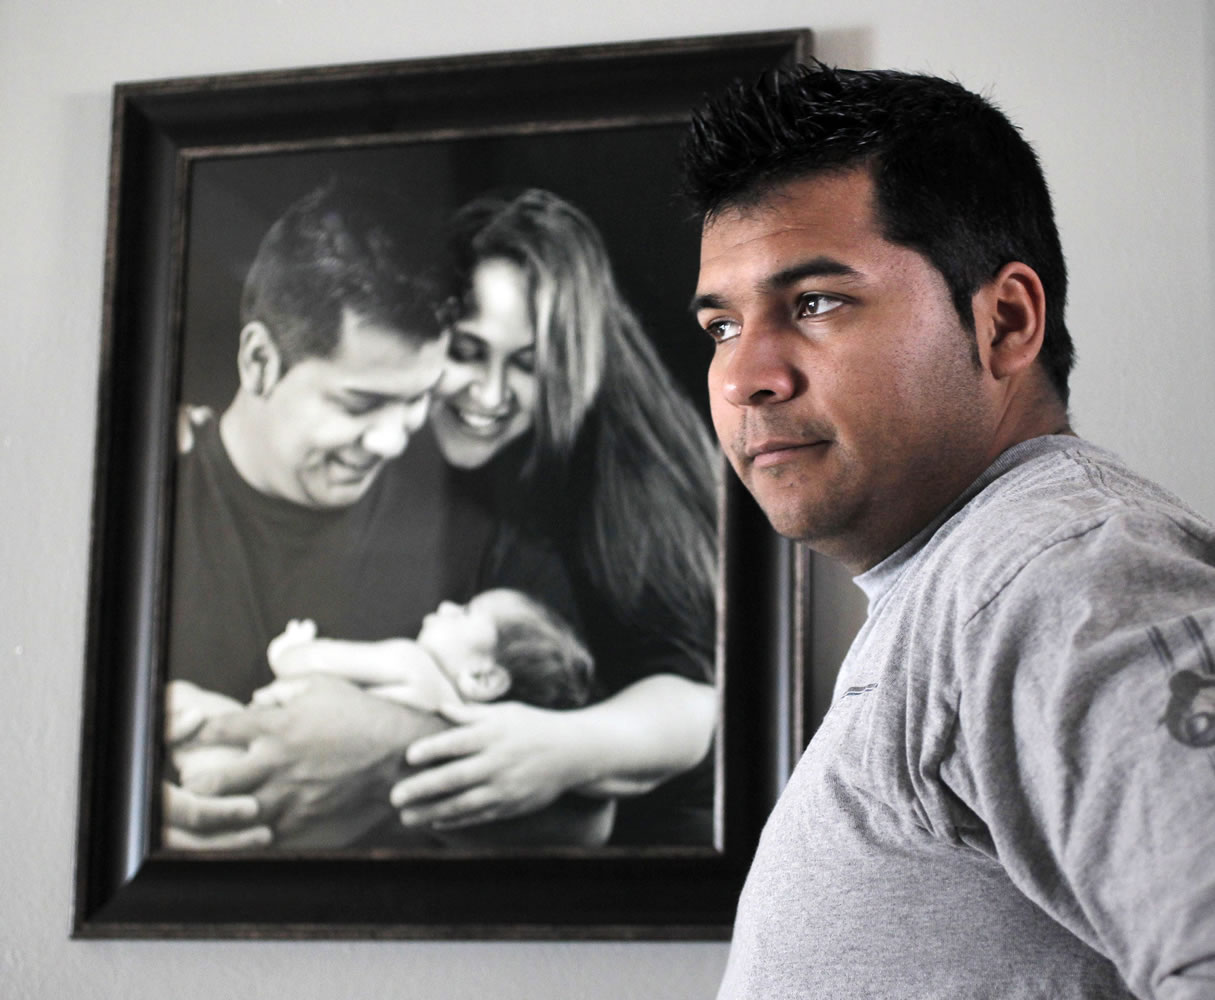 Erick Munoz stands Jan. 3 with a portrait of himself with his wife, Marlise, and their son Mateo in Haltom City, Texas. Marlise Munoz met the criteria to be declared dead almost two months ago, but the hospital where she was taken Nov. 26 has refused to do so.